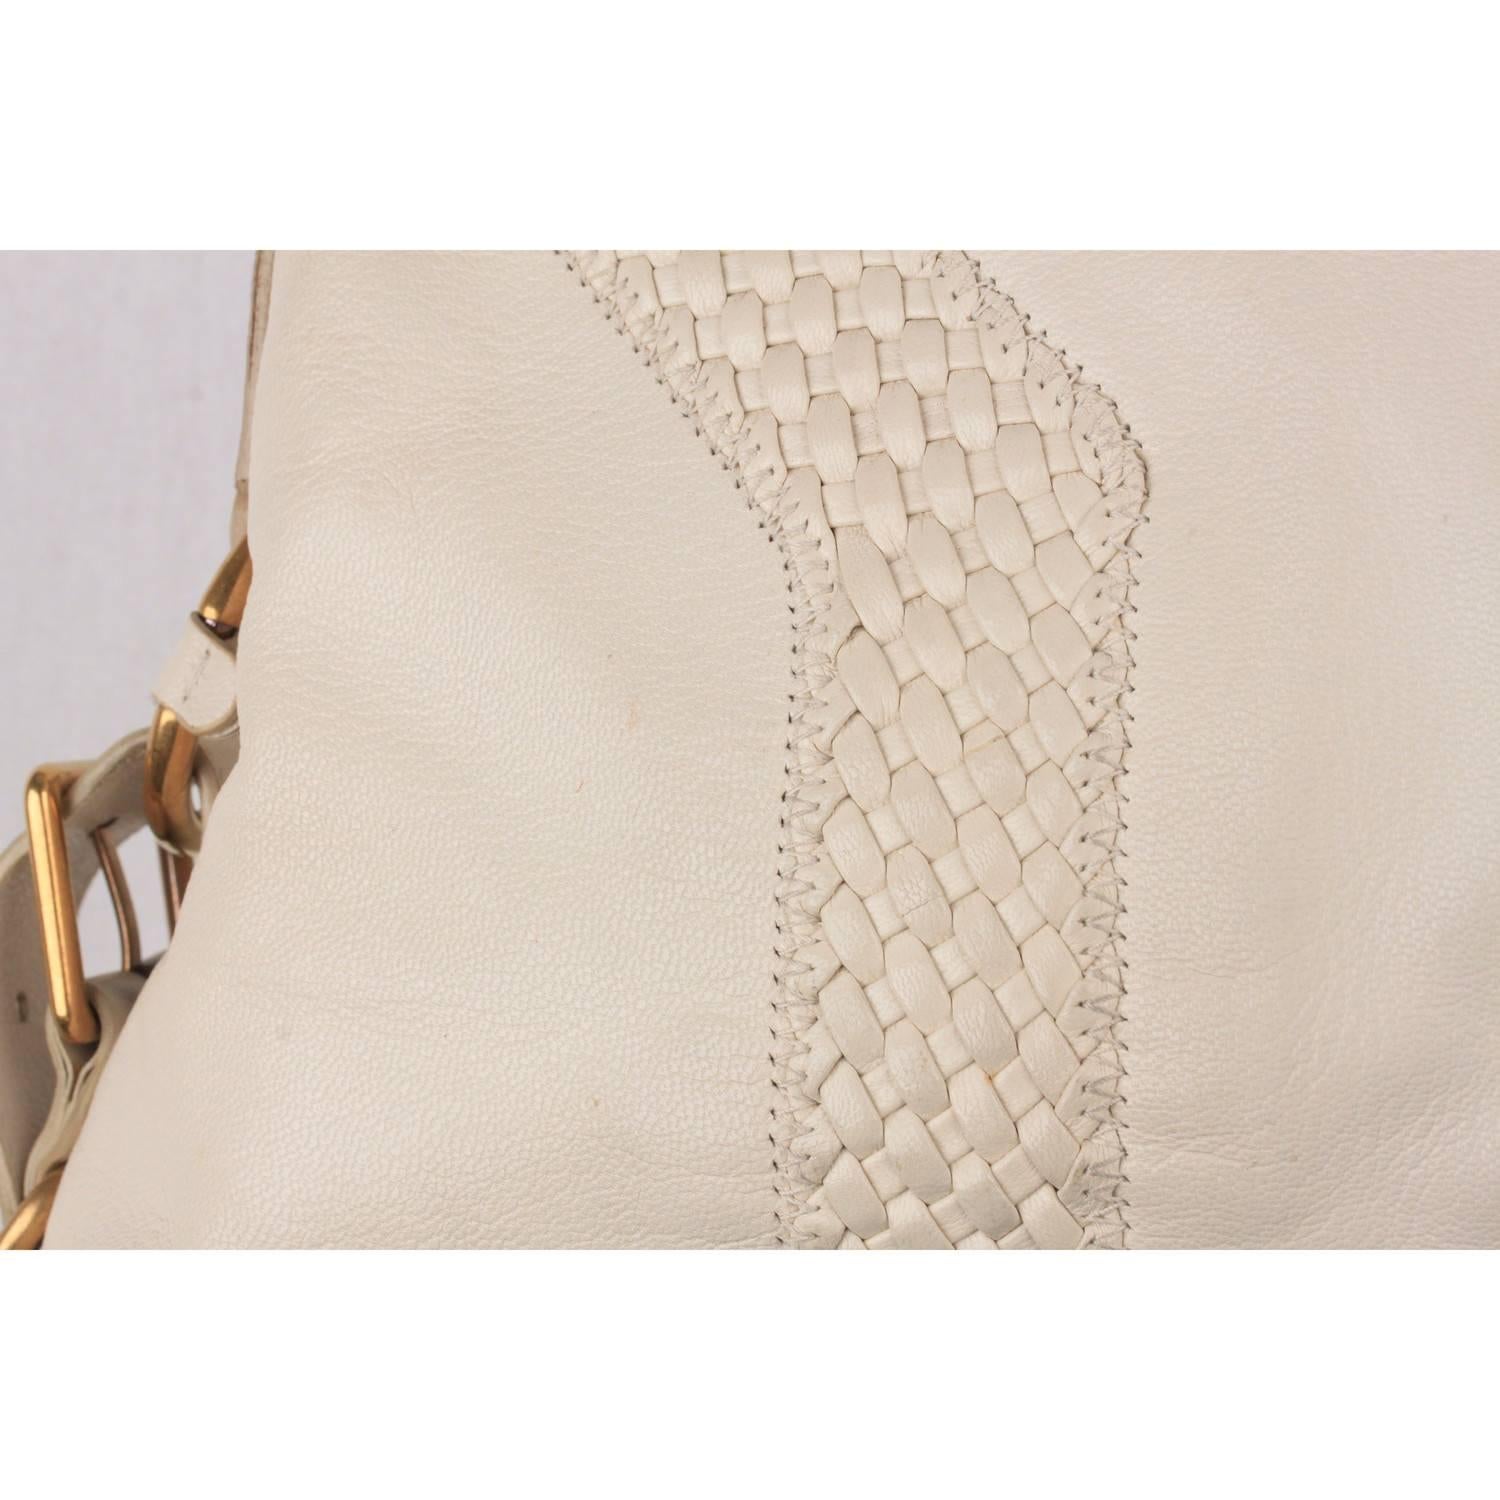 Women's YVES SAINT LAURENT White Leather MUSE BAG Tote